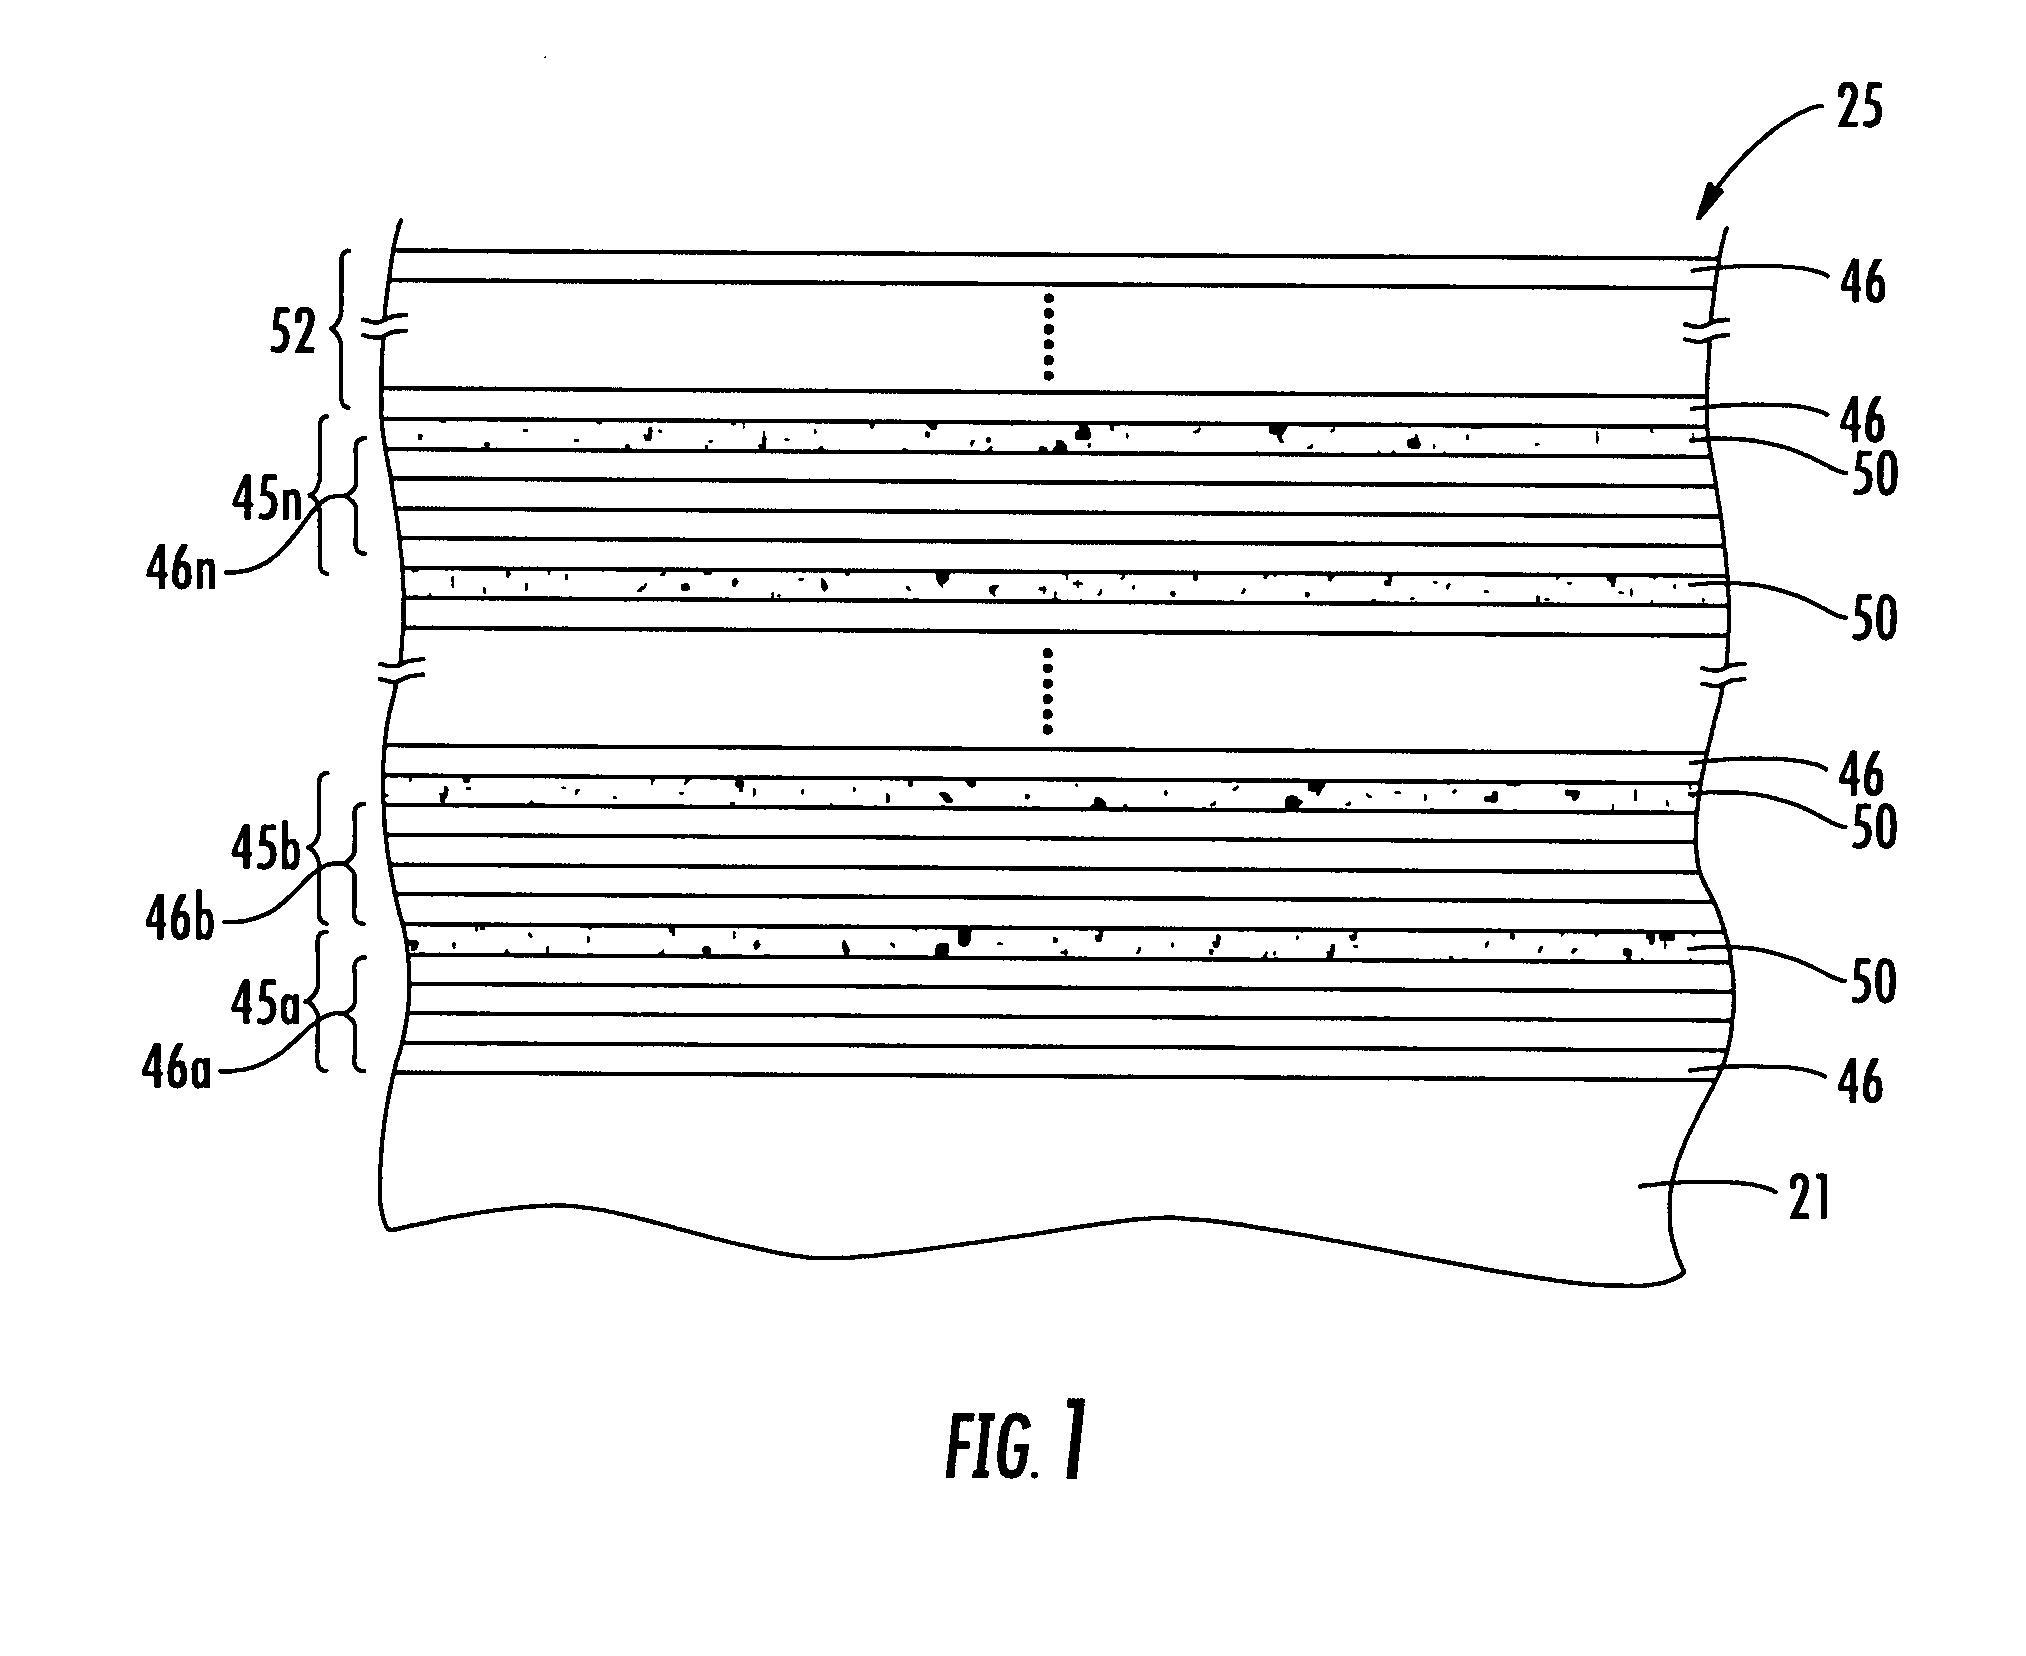 Method for making an electronic device including a poled superlattice having a net electrical dipole moment